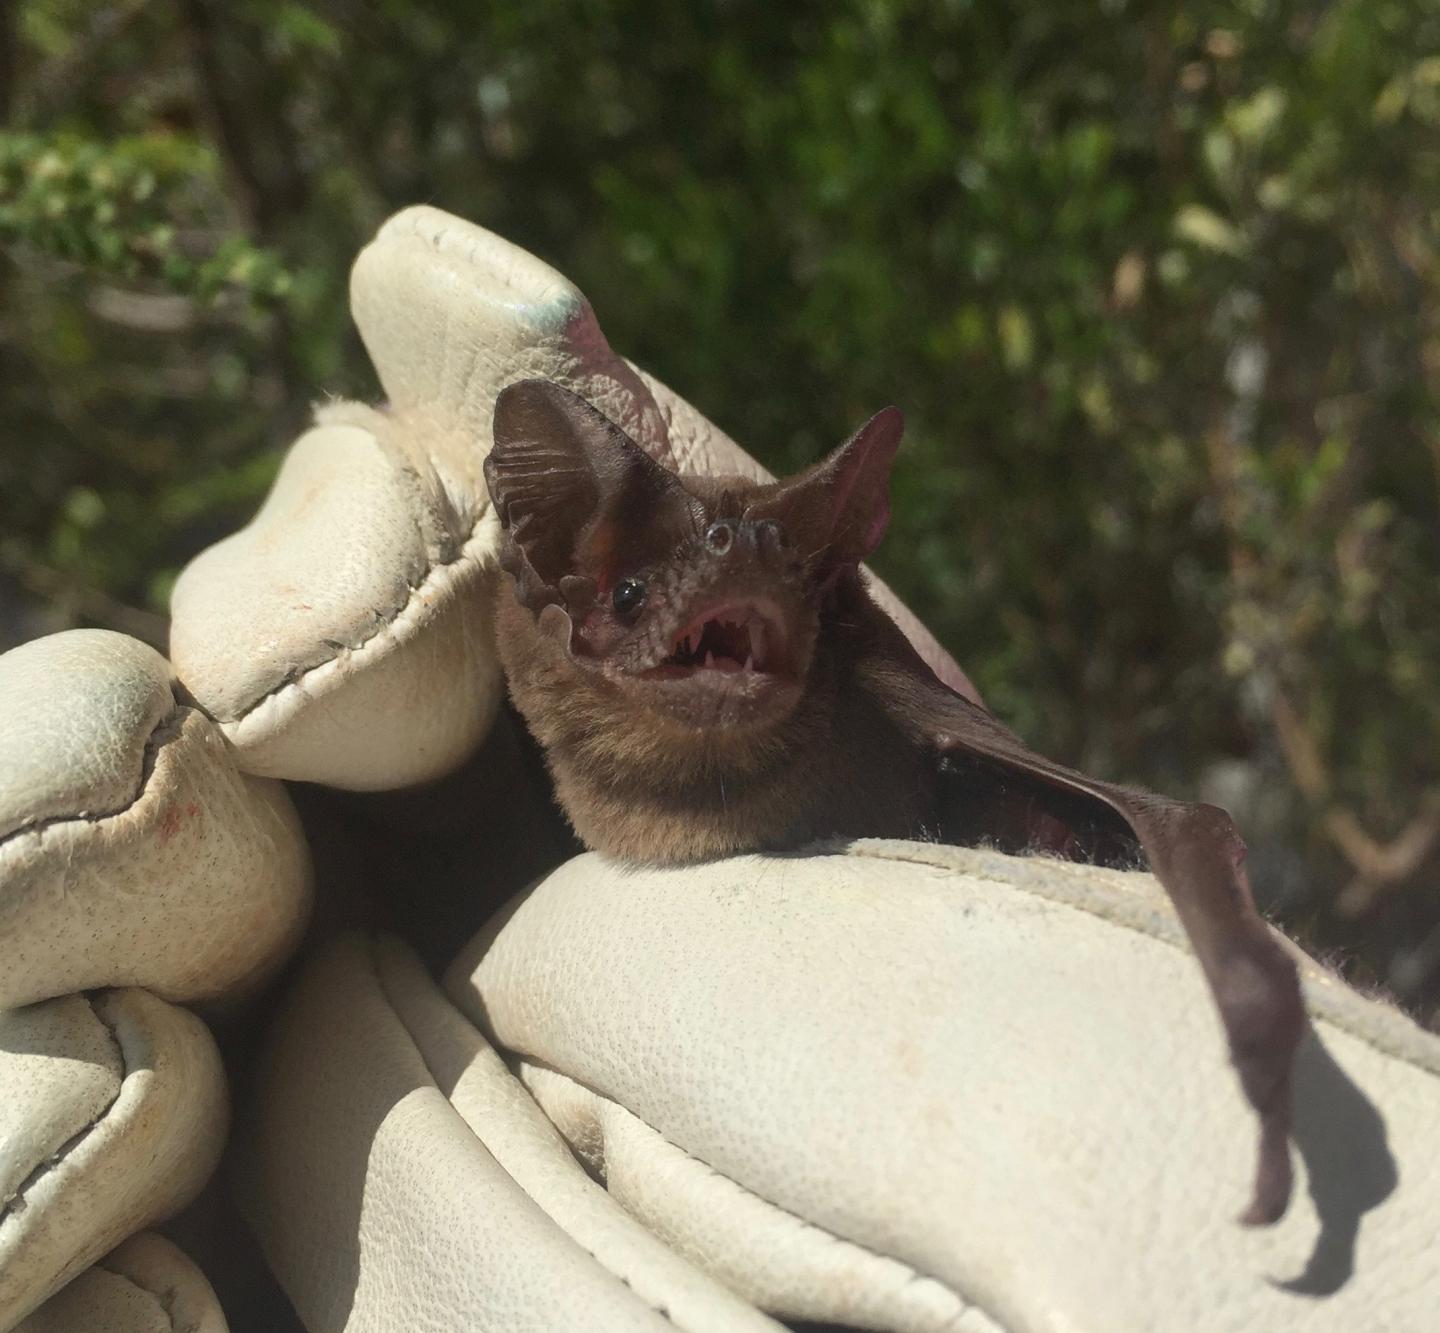 Ocean Channel is No-Fly Zone for Brazilian Free-Tailed Bats